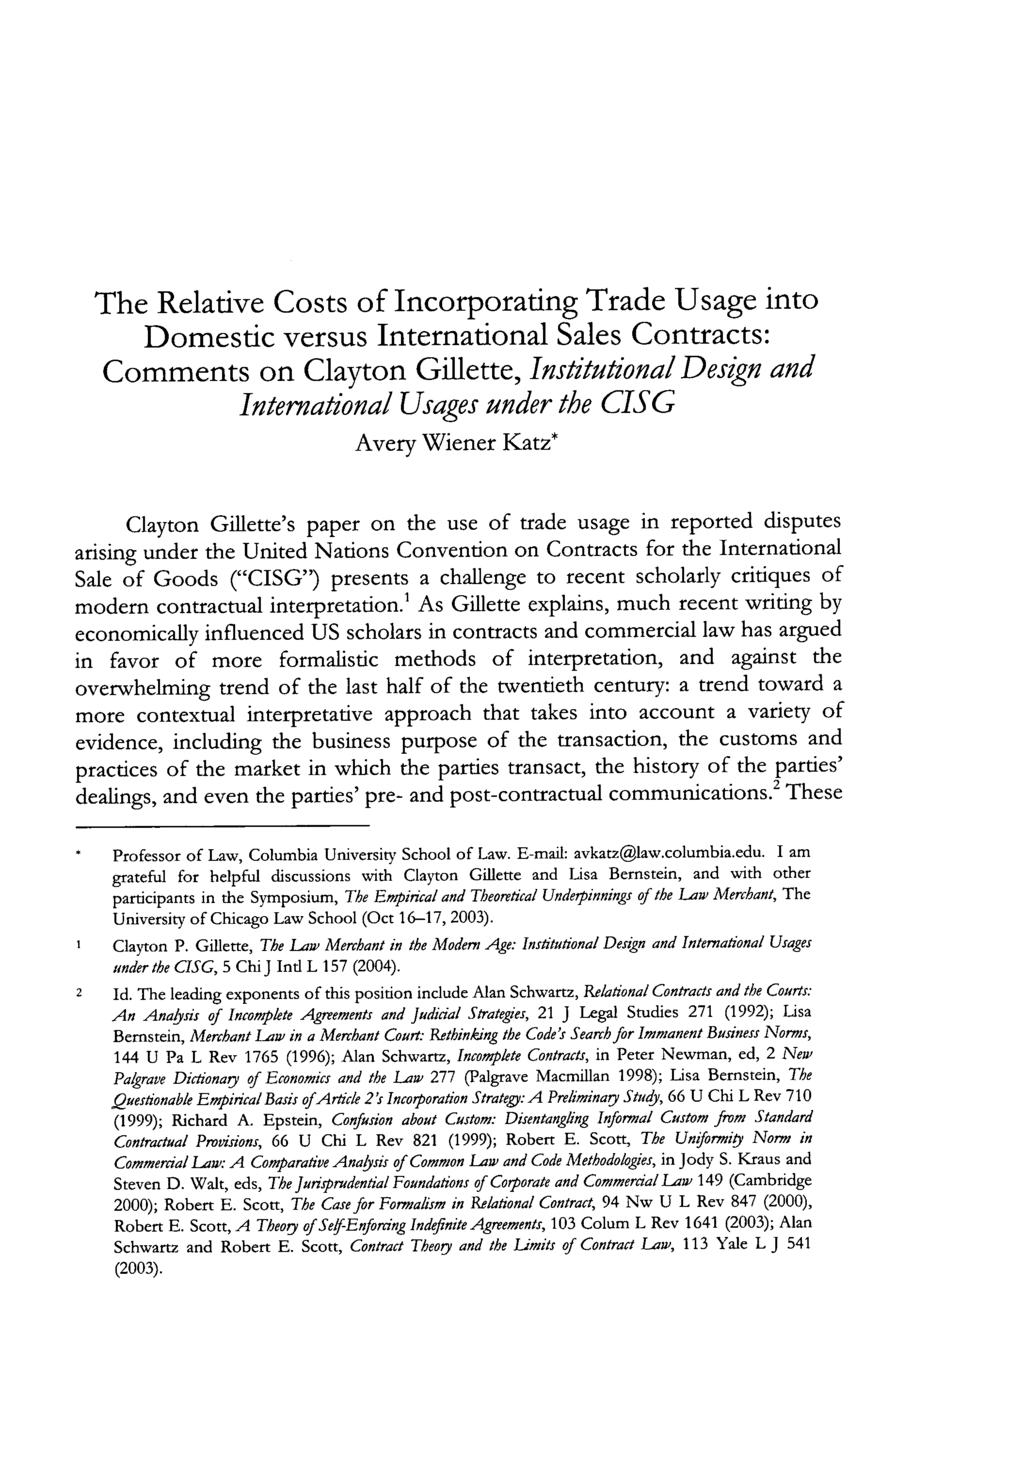 The Relative Costs of Incorporating Trade Usage into Domestic versus International Sales Contracts: Comments on Clayton Gillette, Institutional Design and International Usages under the CISG Avery